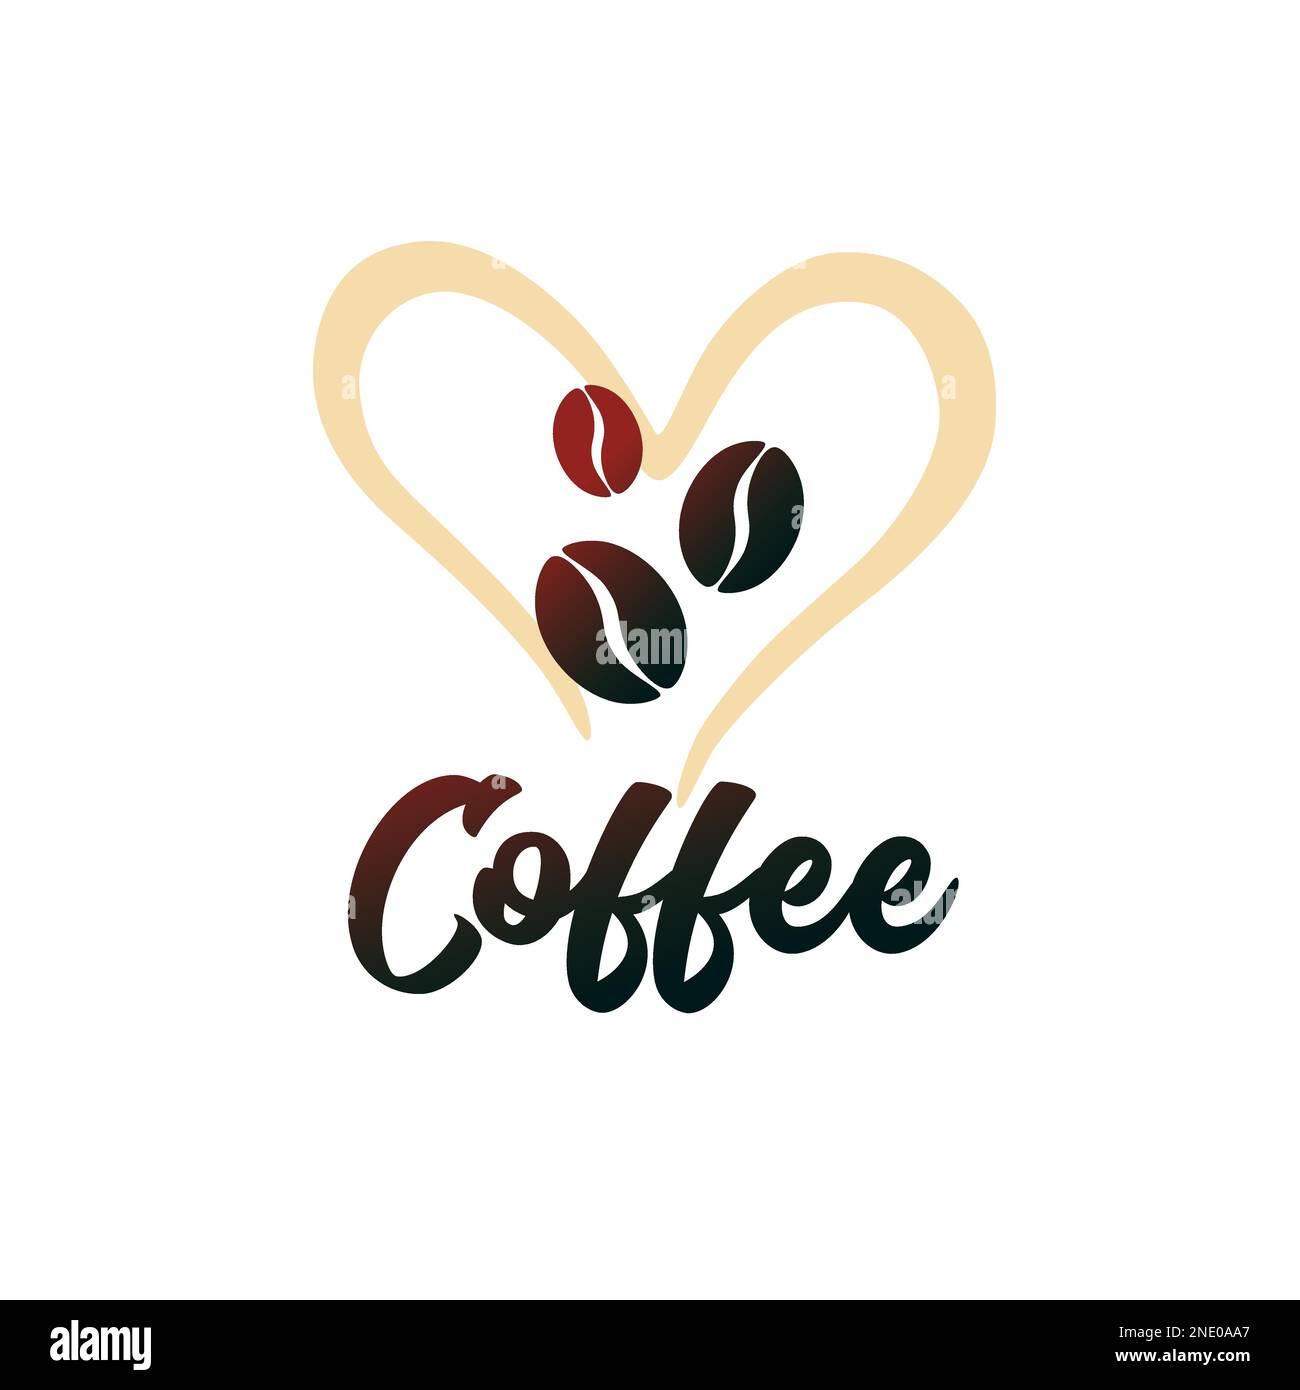 Coffee logo with coffee beans and aroma heart shape. Identy for cappuccino drink with coffee beans and fragrance. Vector illustration Stock Vector